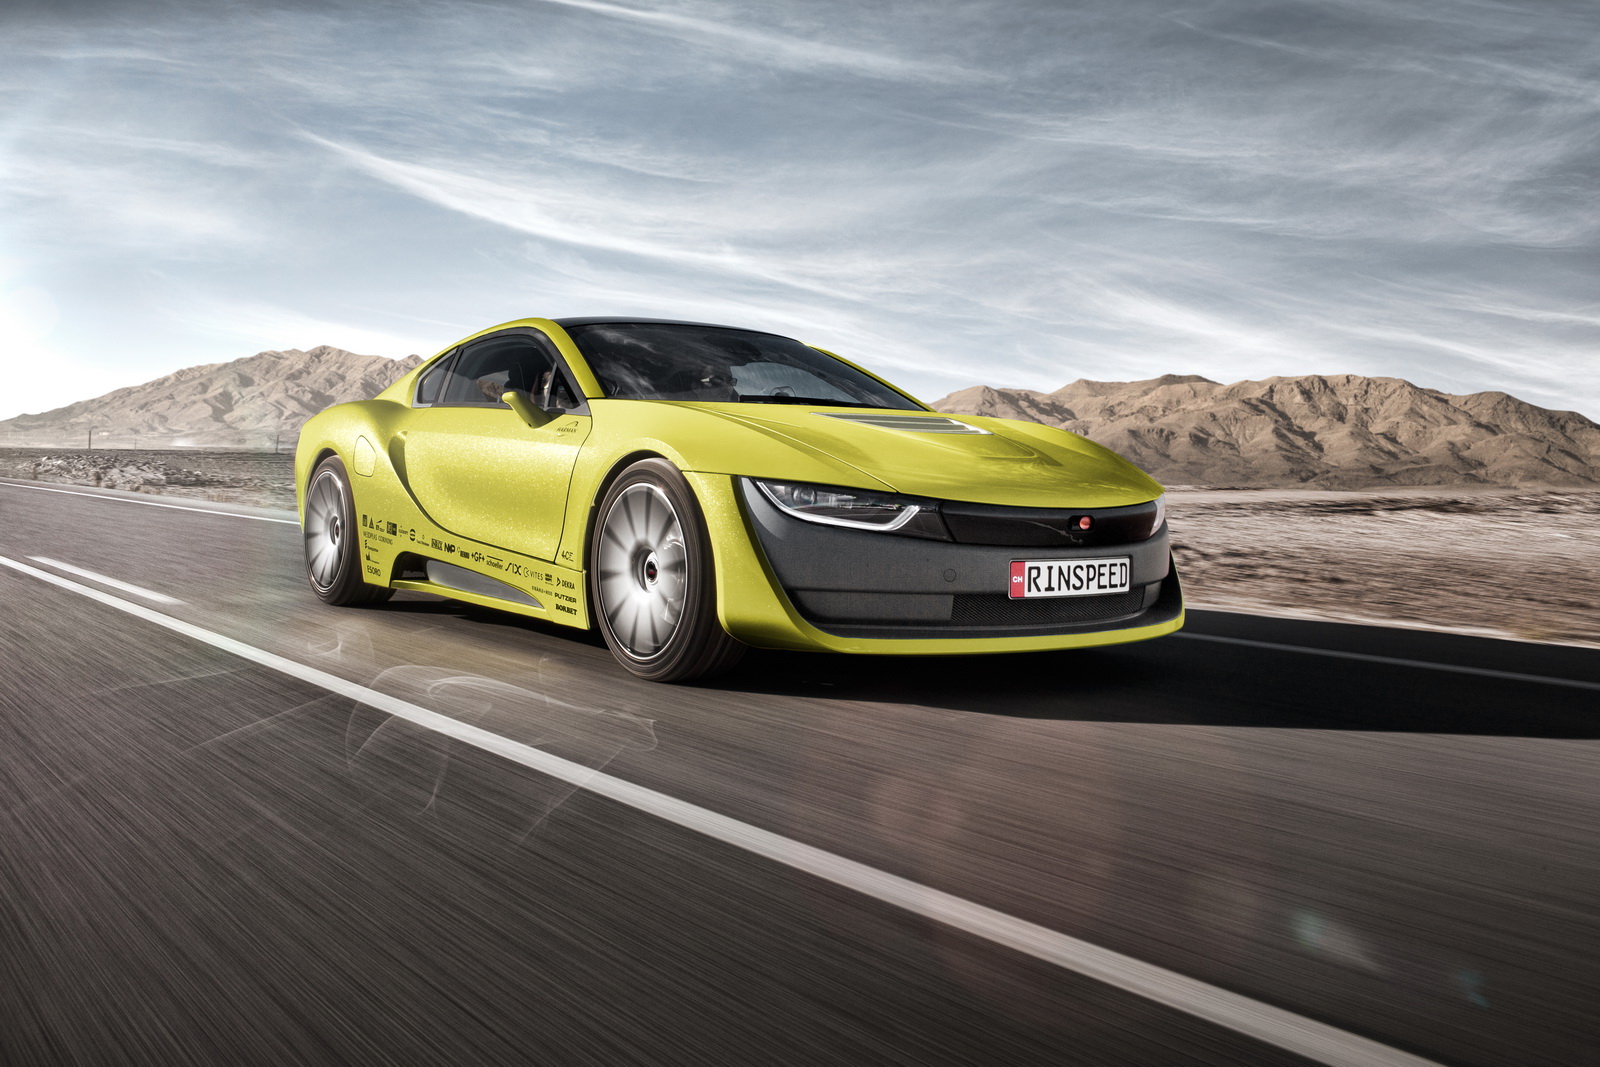 Video: BMW i8-Based Ʃtos Concept by Rinspeed